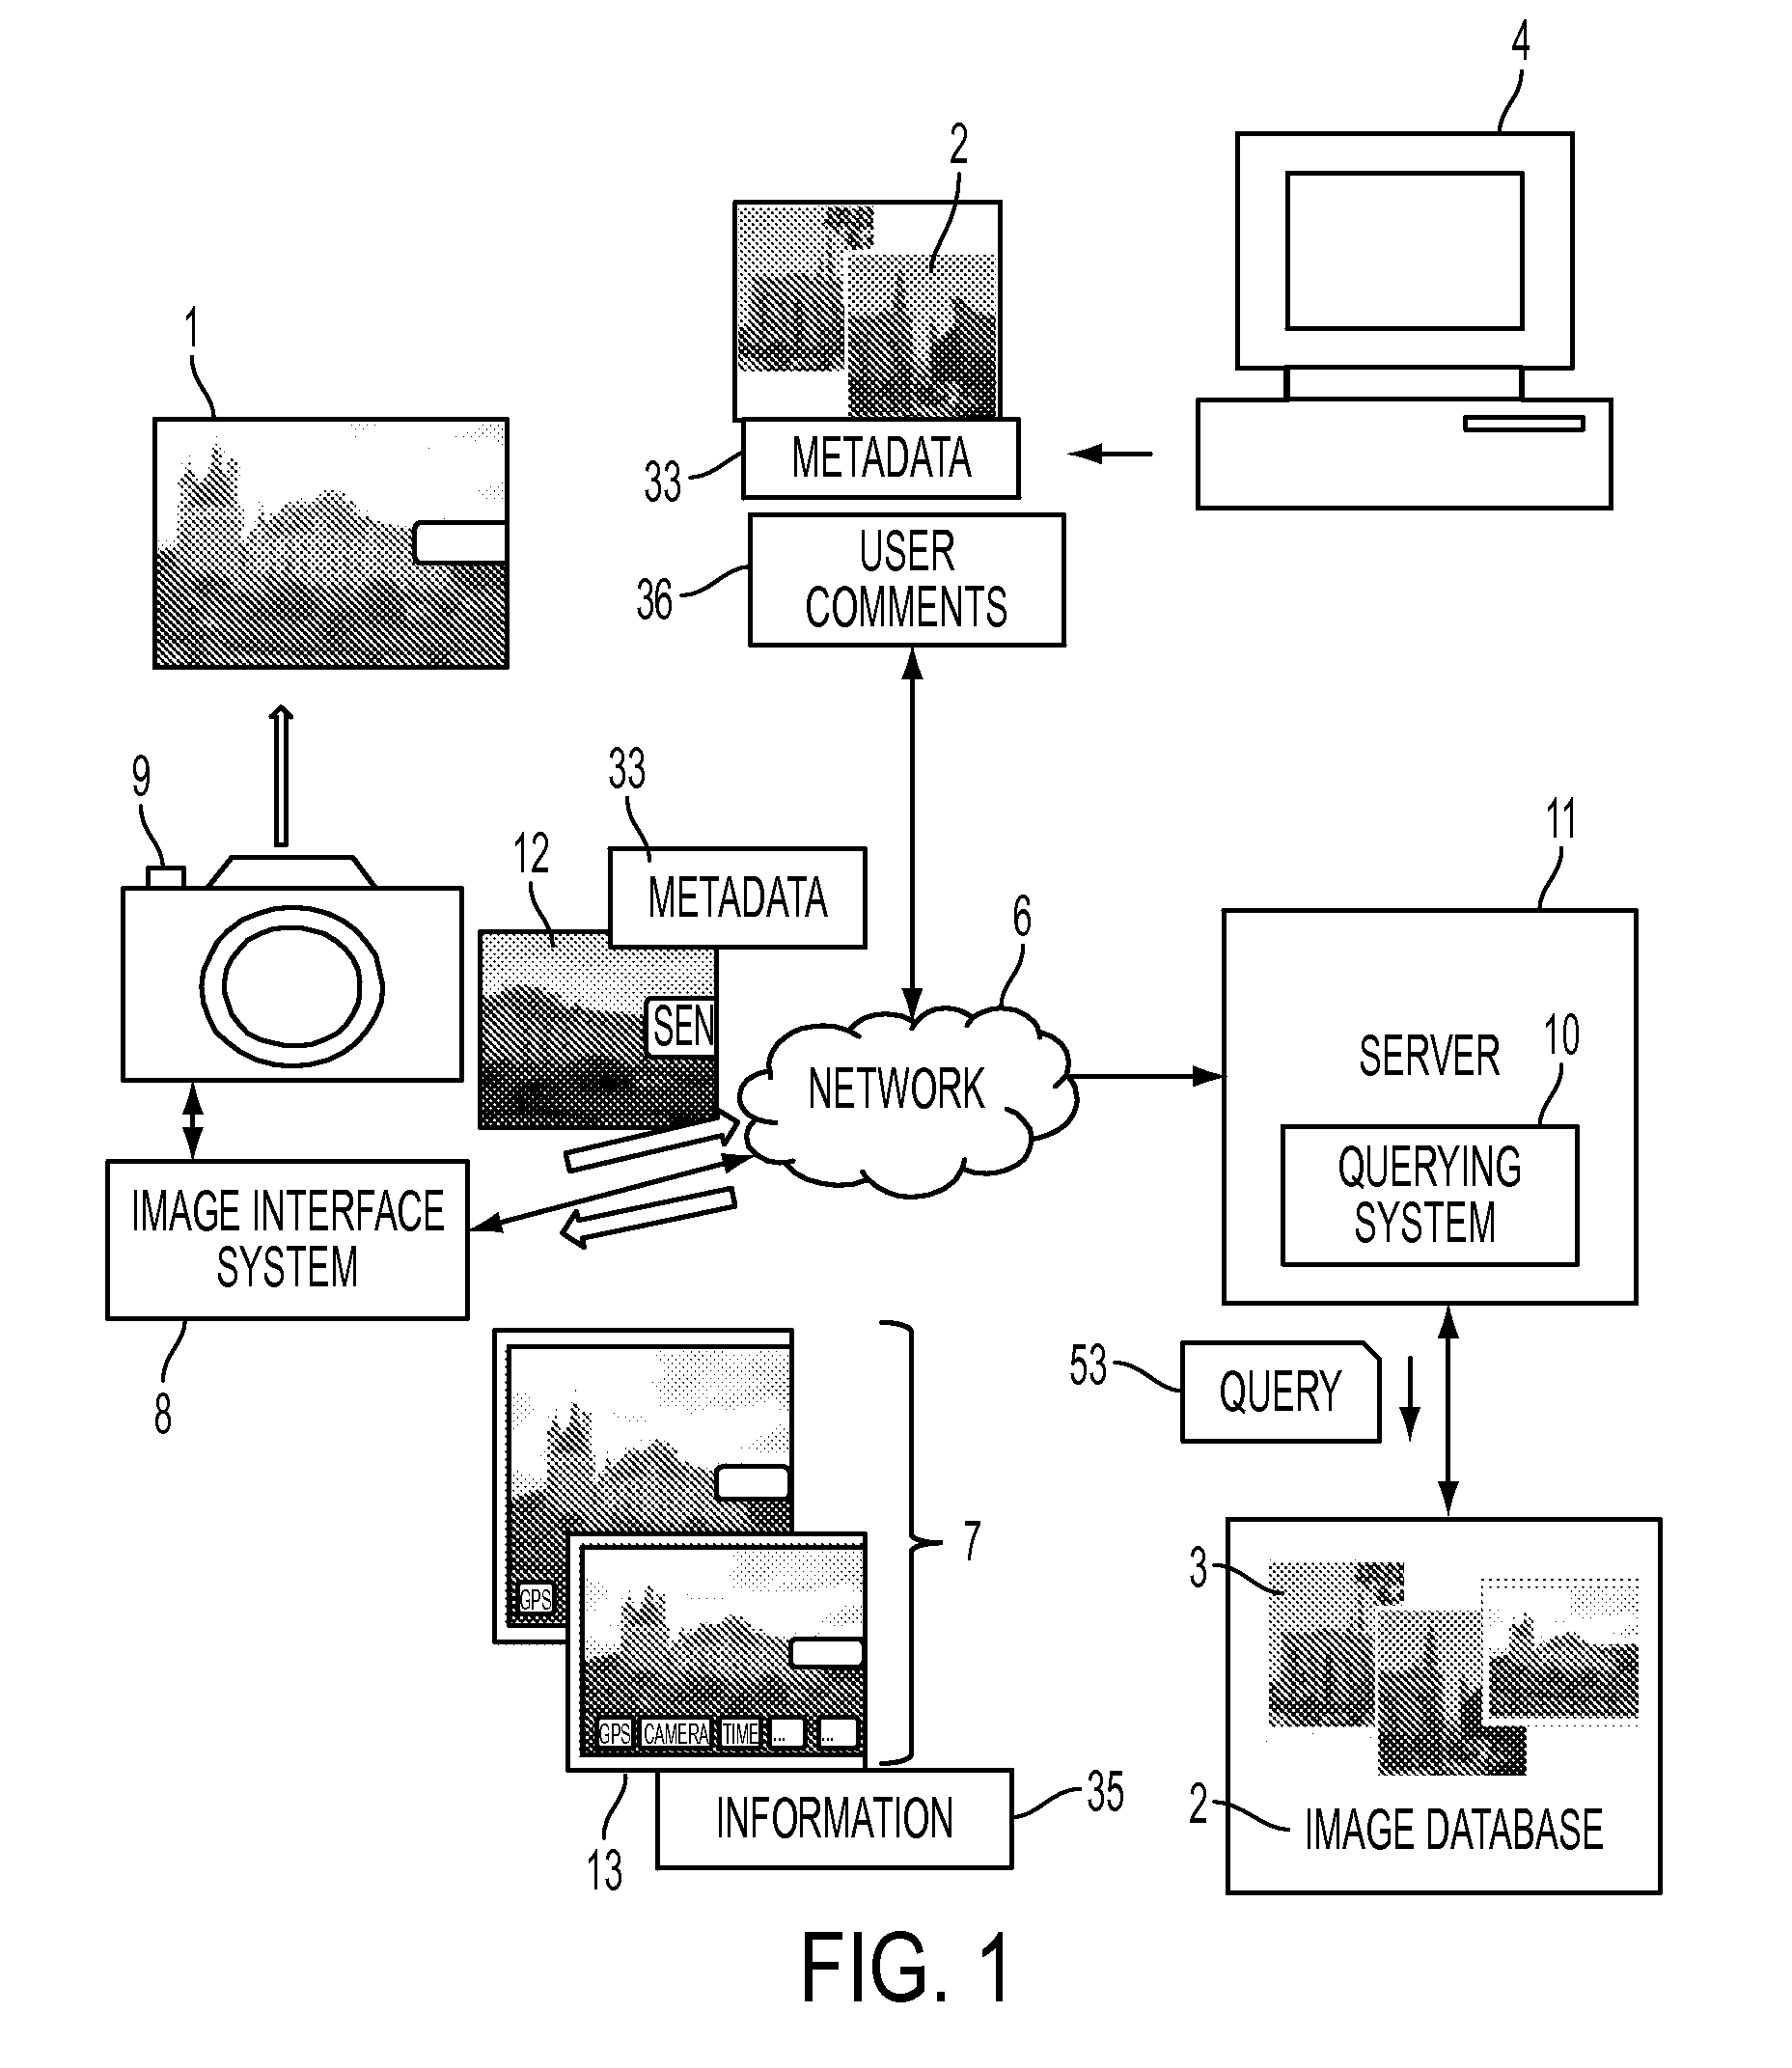 Photography assistant and method for assisting a user in photographing landmarks and scenes